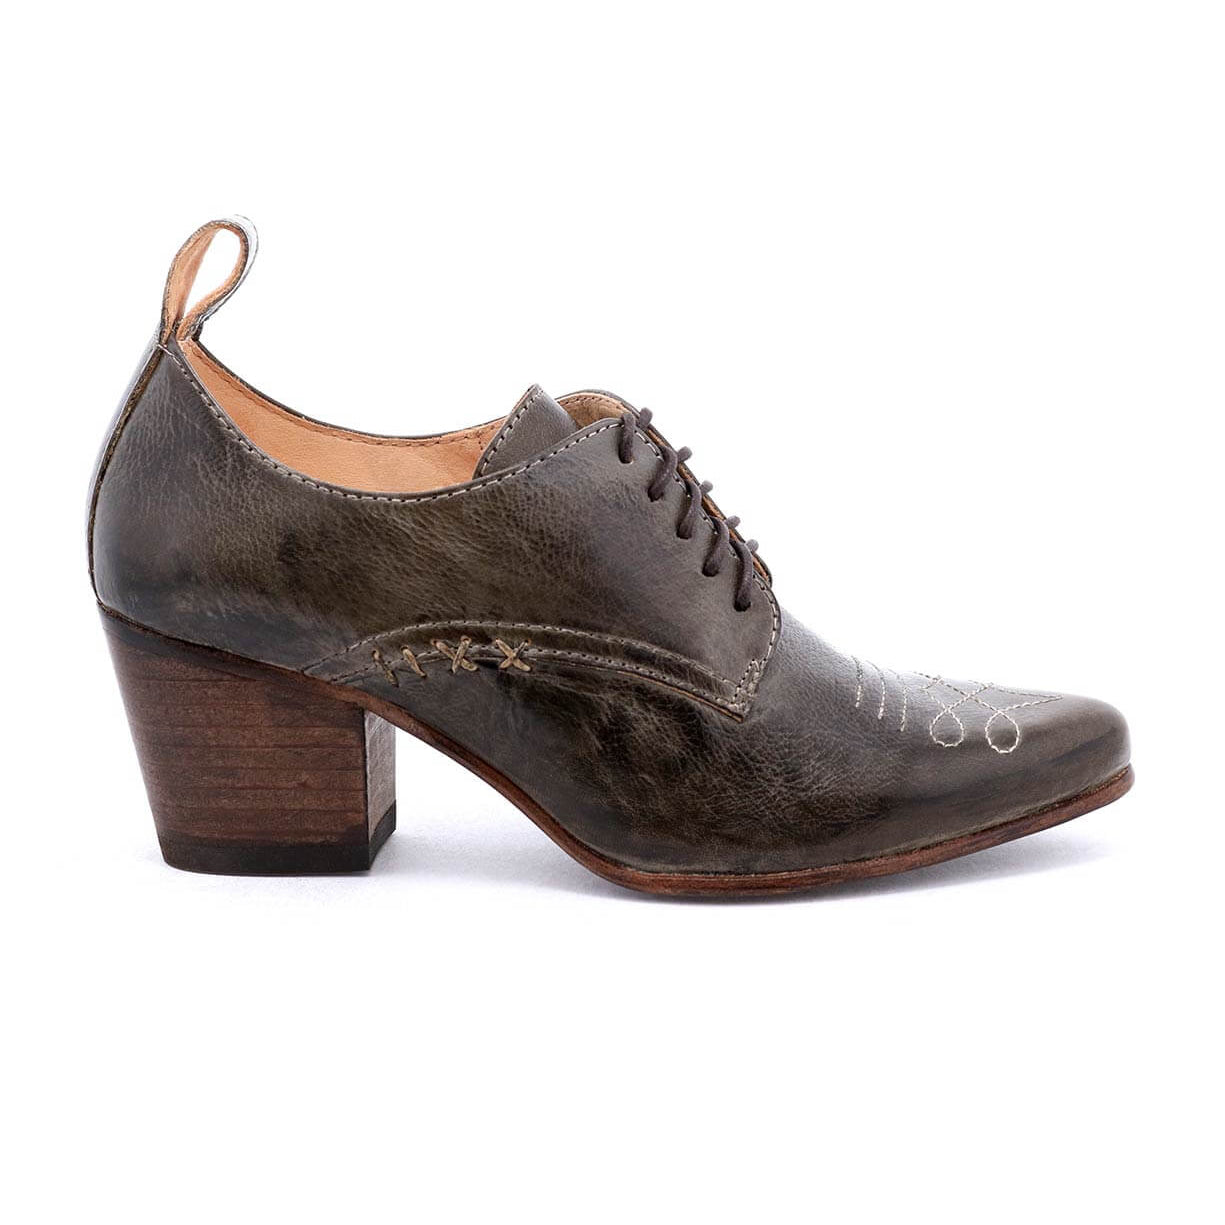 A women's Braunstone grey leather oxford shoe with a wooden heel, featuring a Victorian inspired silhouette, by Oak Tree Farms.